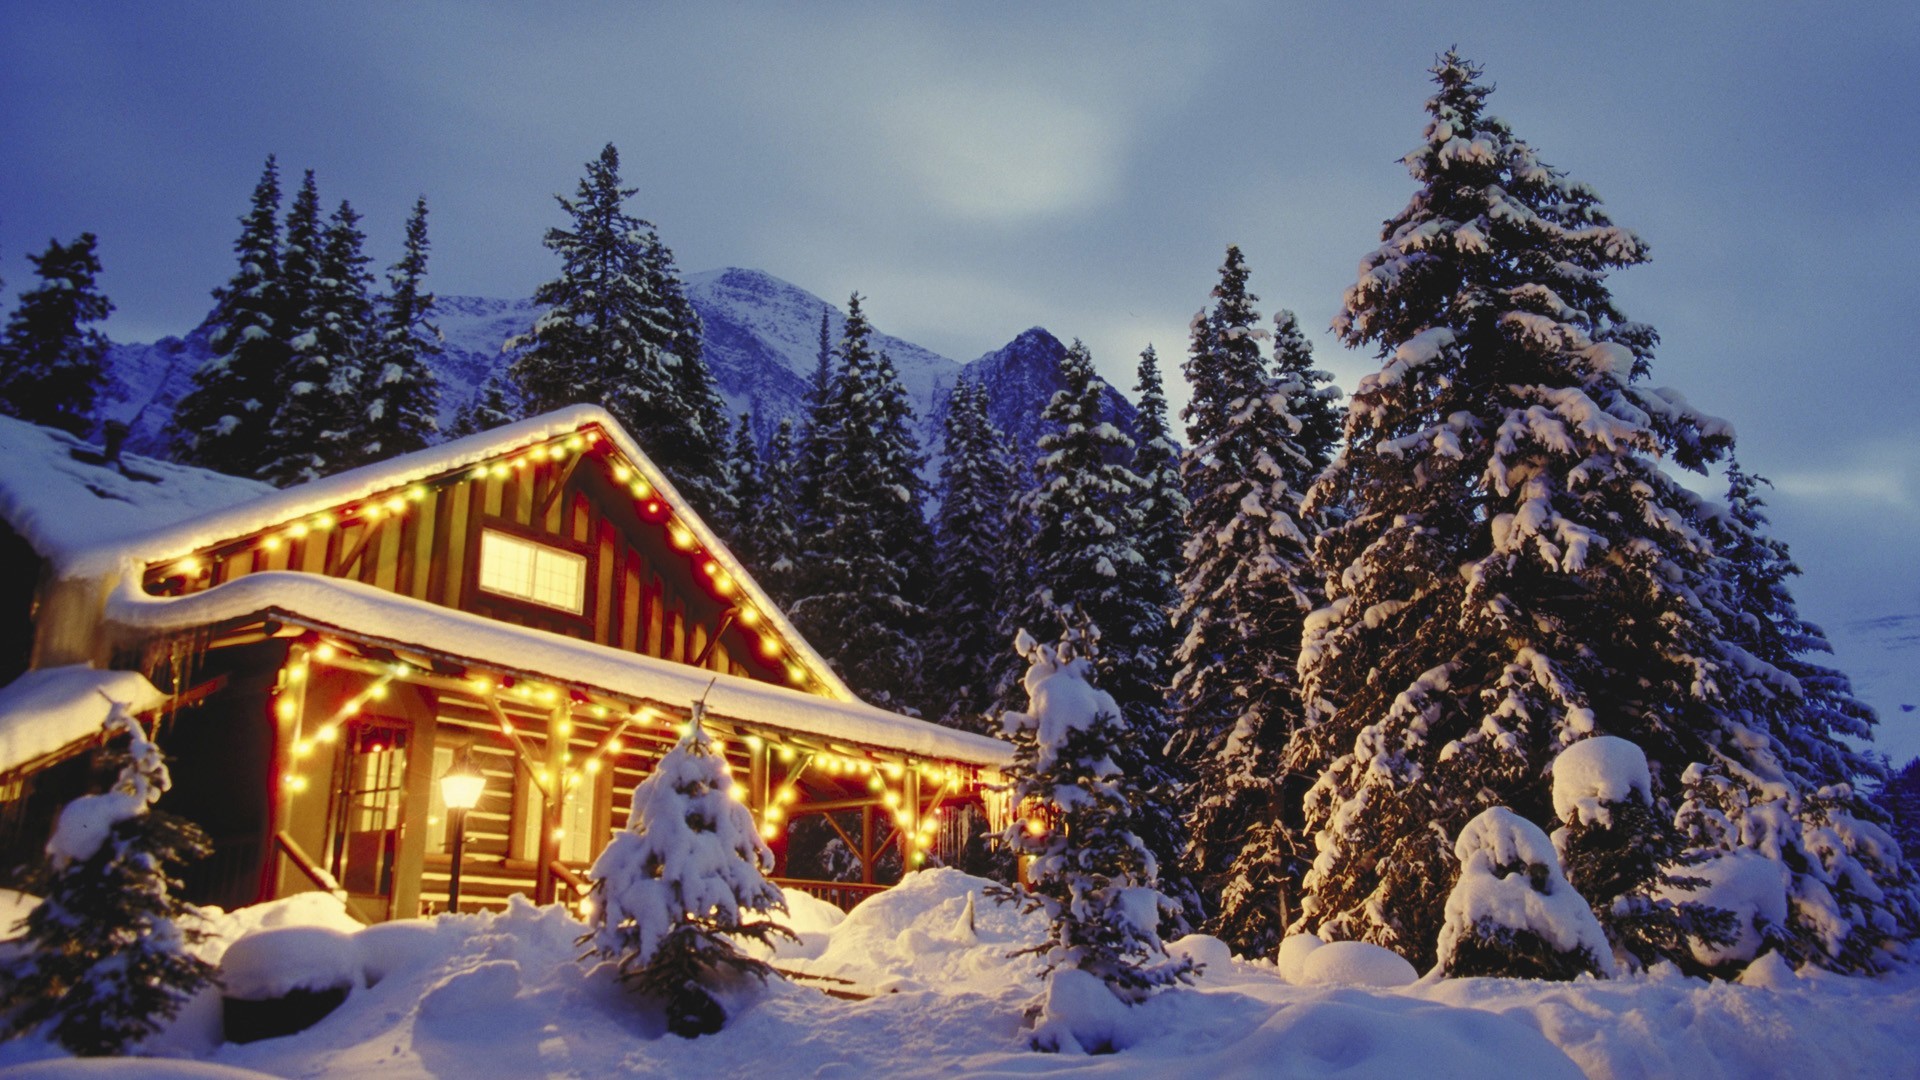 1920x1080 free Woods Christmas wallpaper, resolution : 1920 x tags: Woods, Christmas,  Colorado, Cabin.